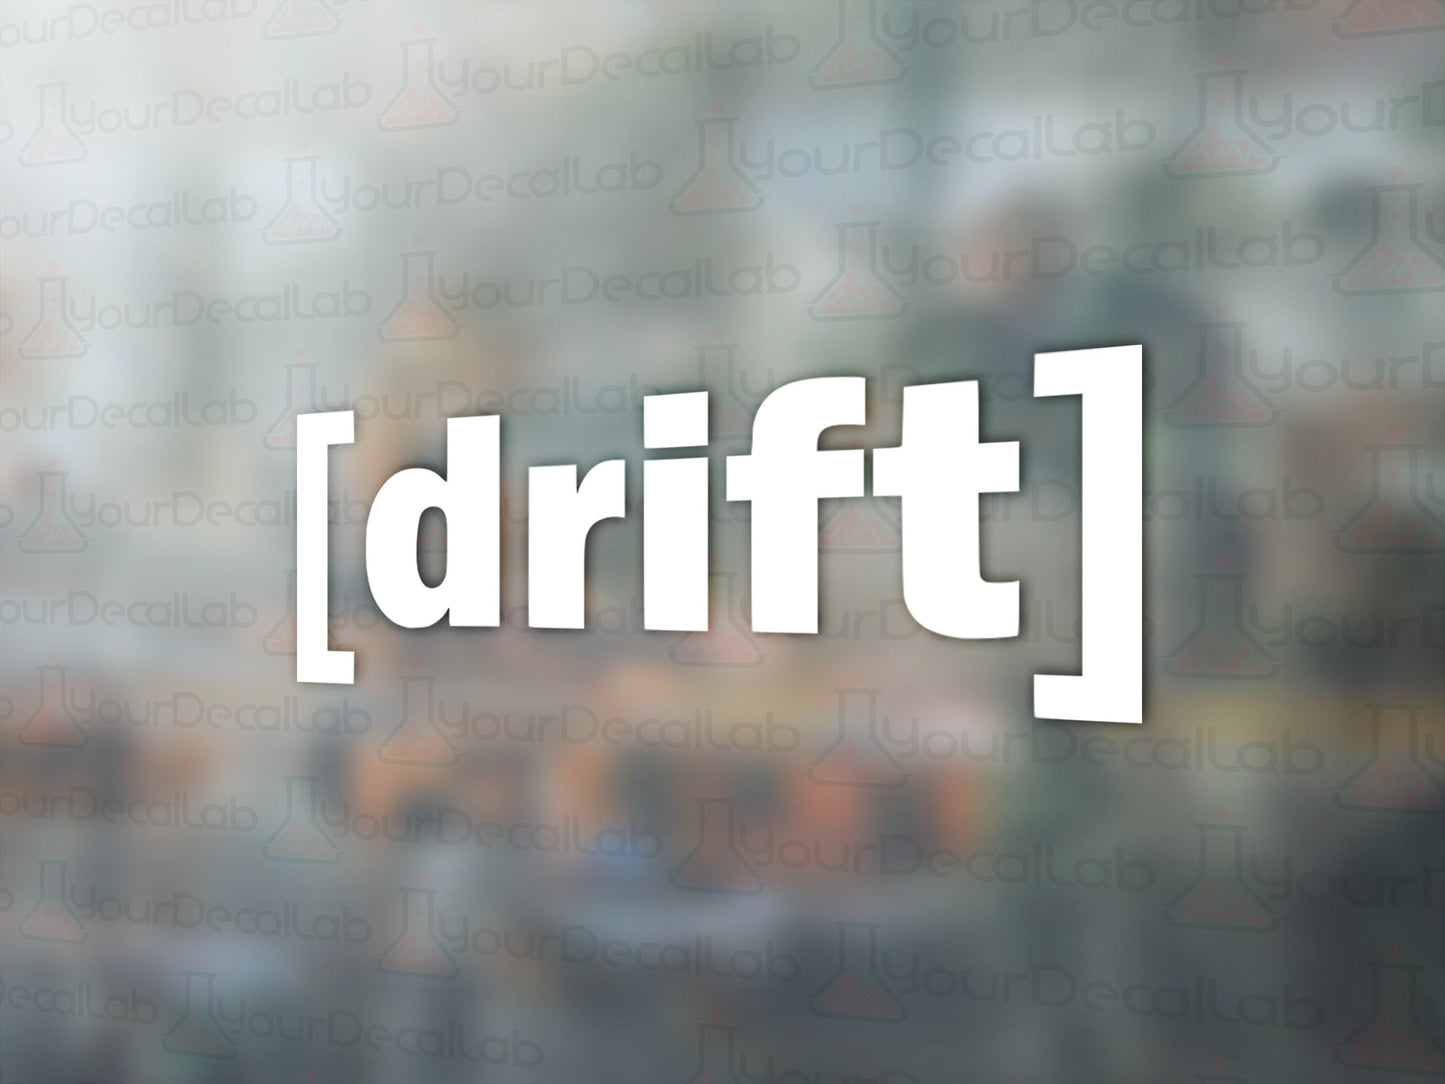 Drift Brackets Decal - Many Colors & Sizes